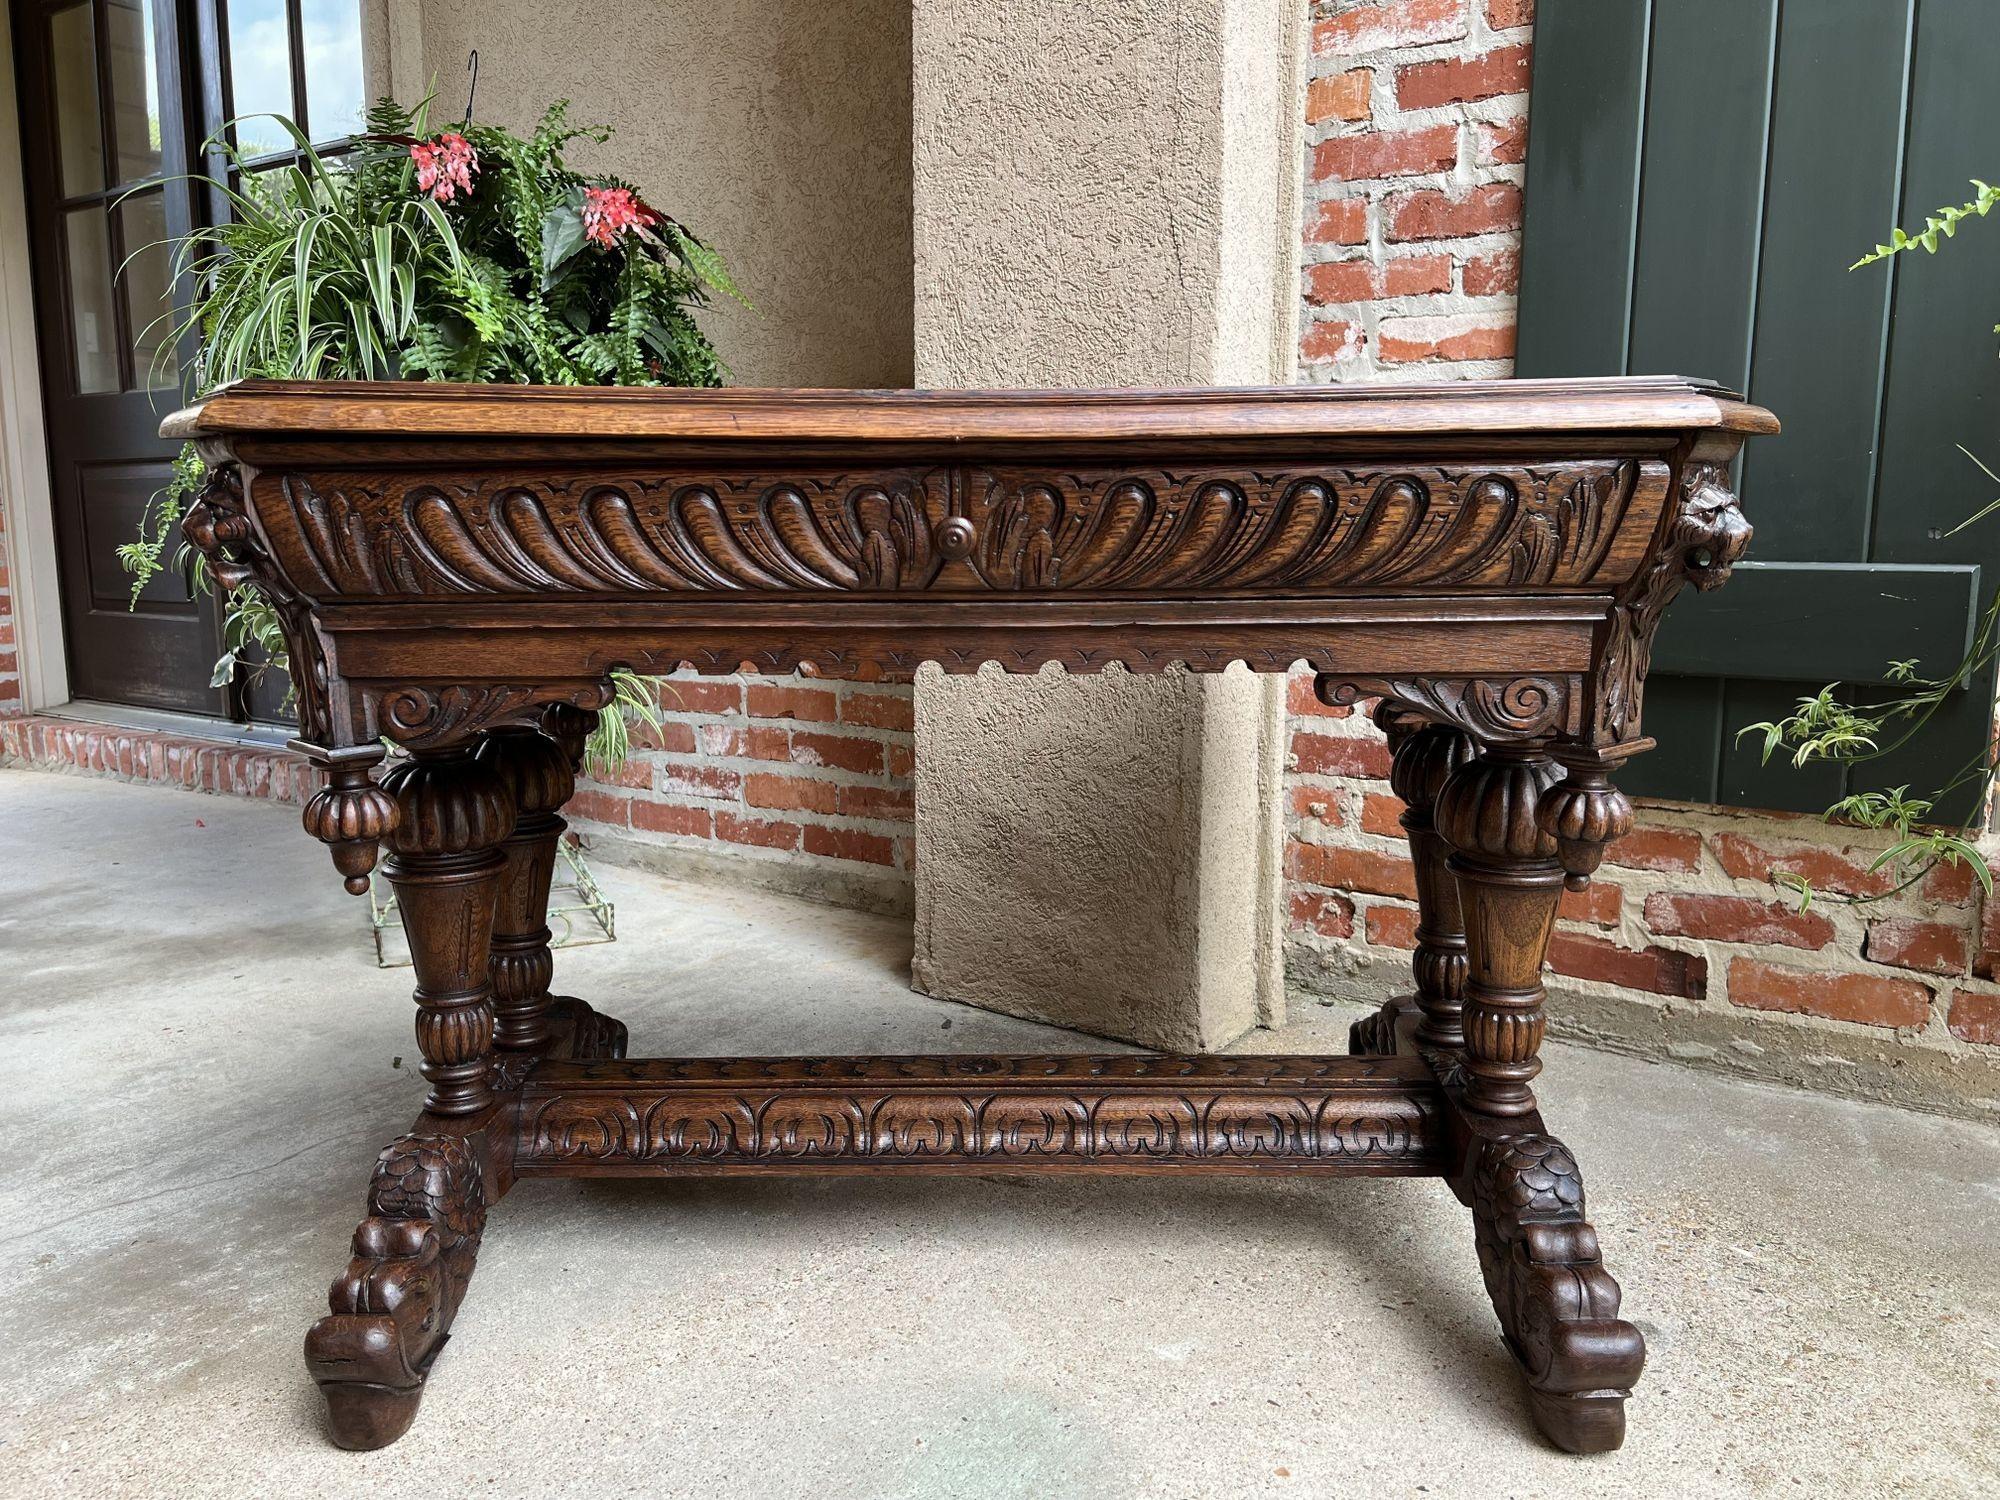 19th century French carved oak Dolphin library table desk Renaissance Gothic.
 
Direct from France, an elegant antique French carved library table or 